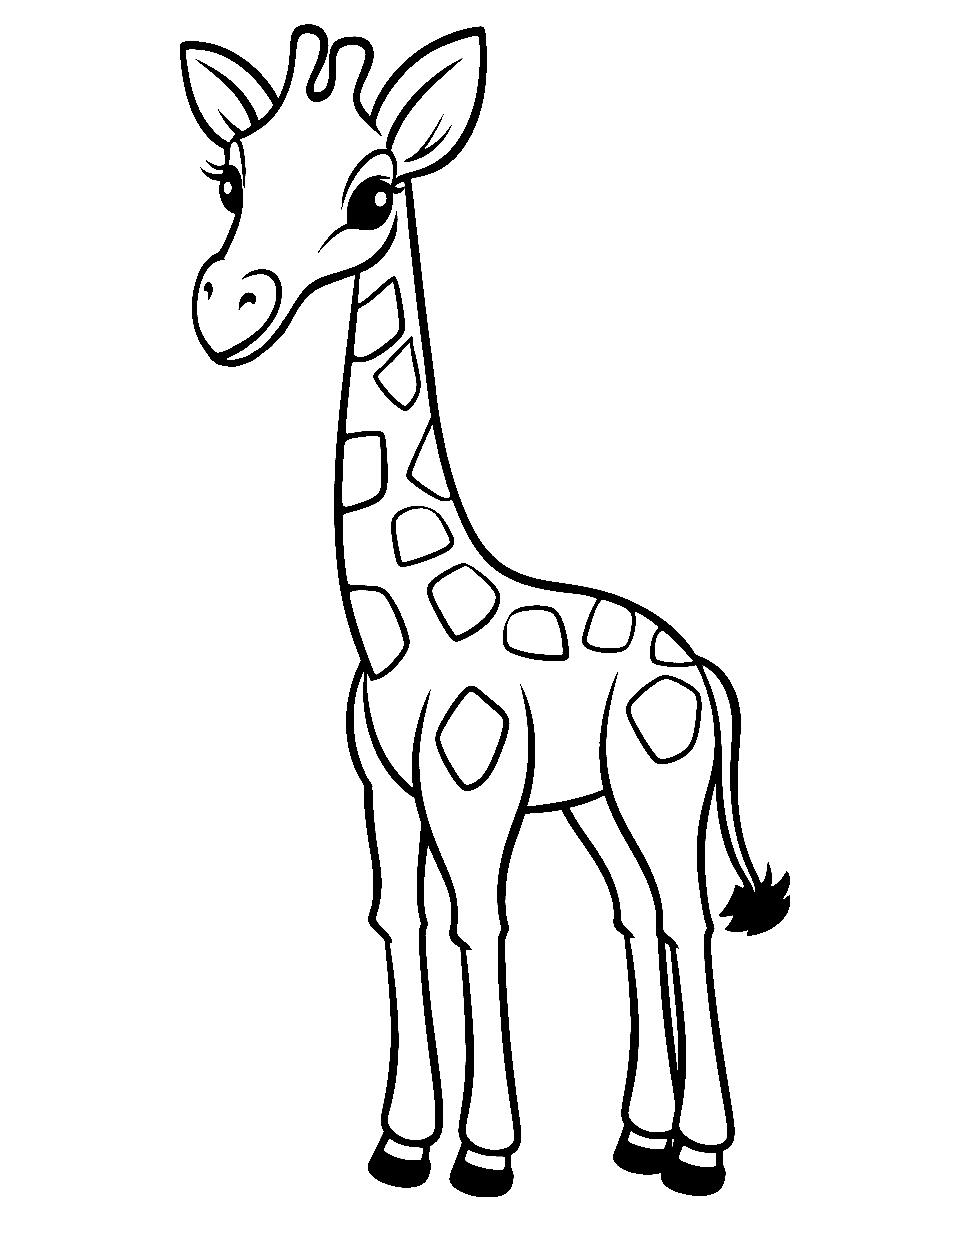 11 Steps: How to Draw a Realistic Giraffe and Get Great Results